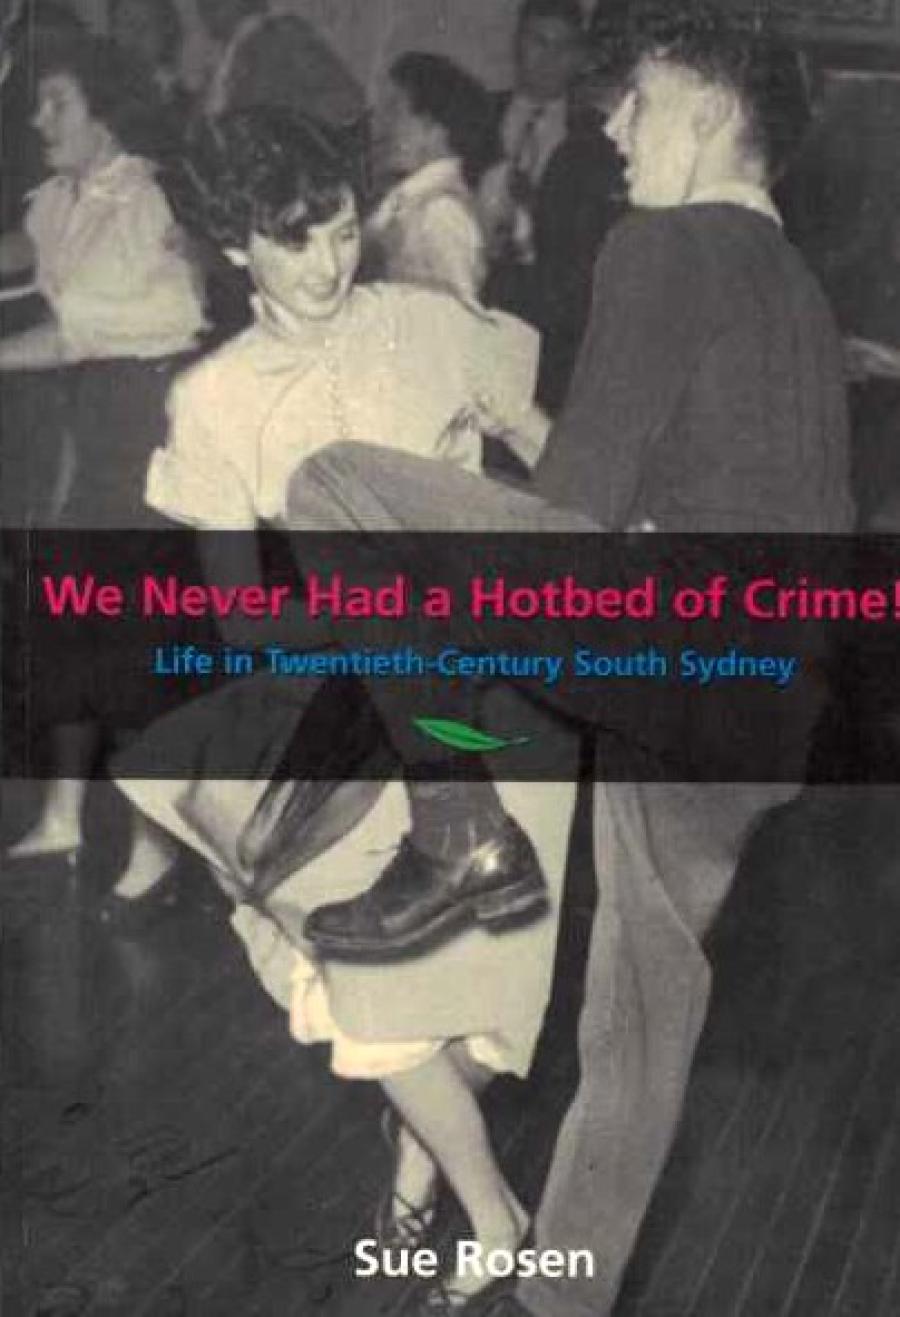 We Never Had a Hotbed of Crime! - hardcover edition